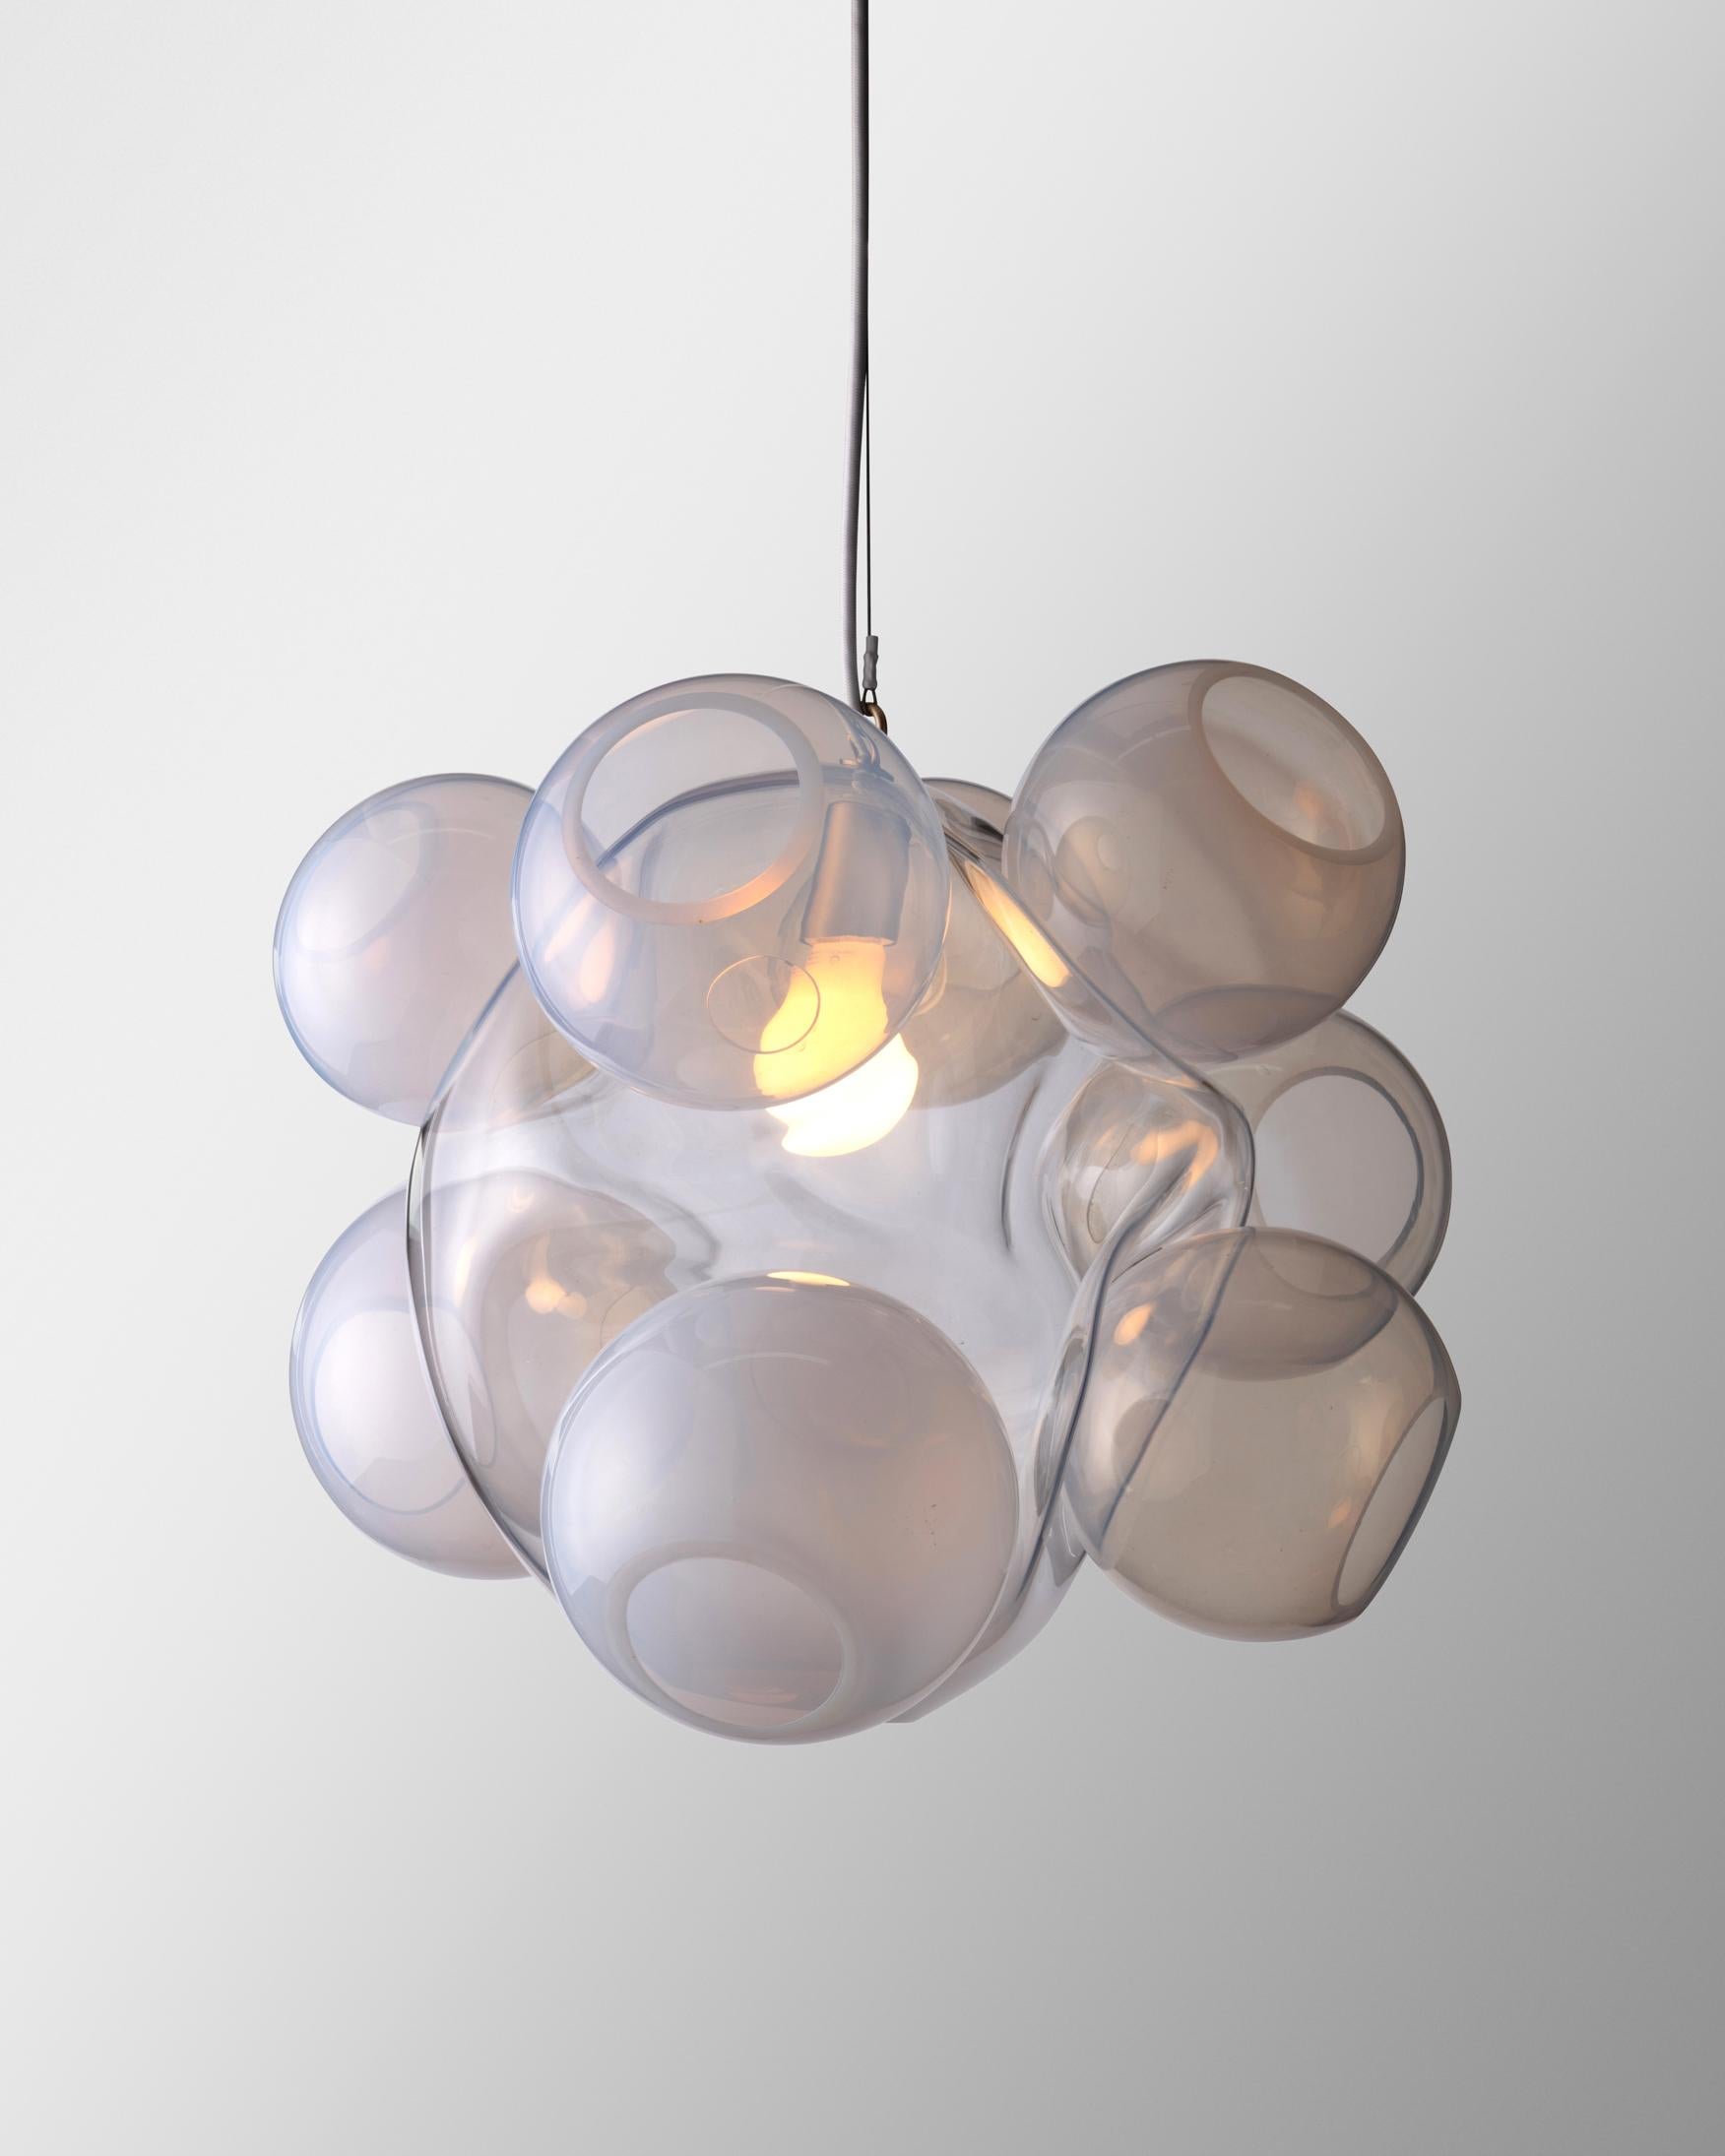 Unique illuminated sculptural pendant with translucent hand blown glass pearls. Designed and made by Jeff Zimmerman, USA, 2014.
 